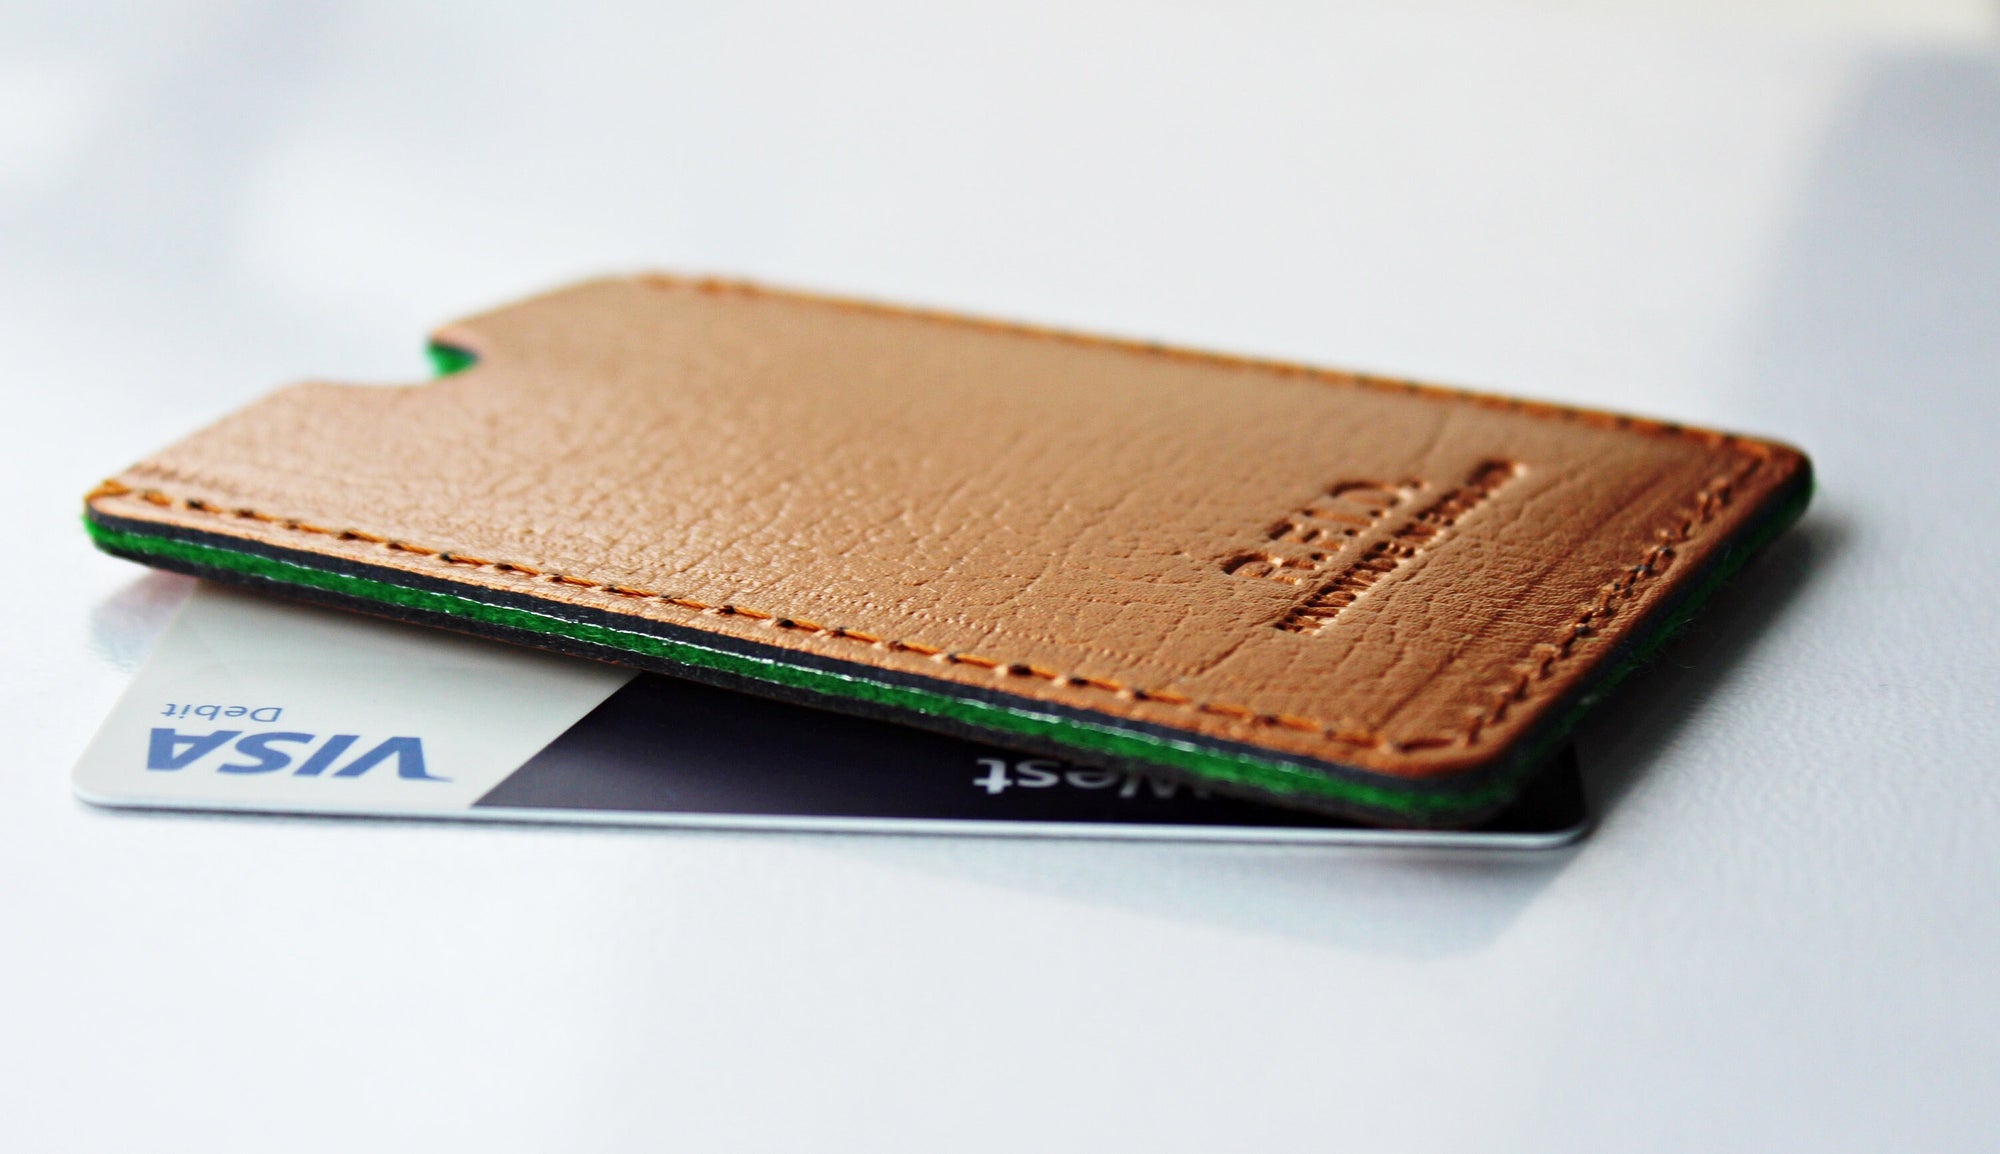 Sleek and Safe: The Minimalist Leather Wallets with RFID Protection